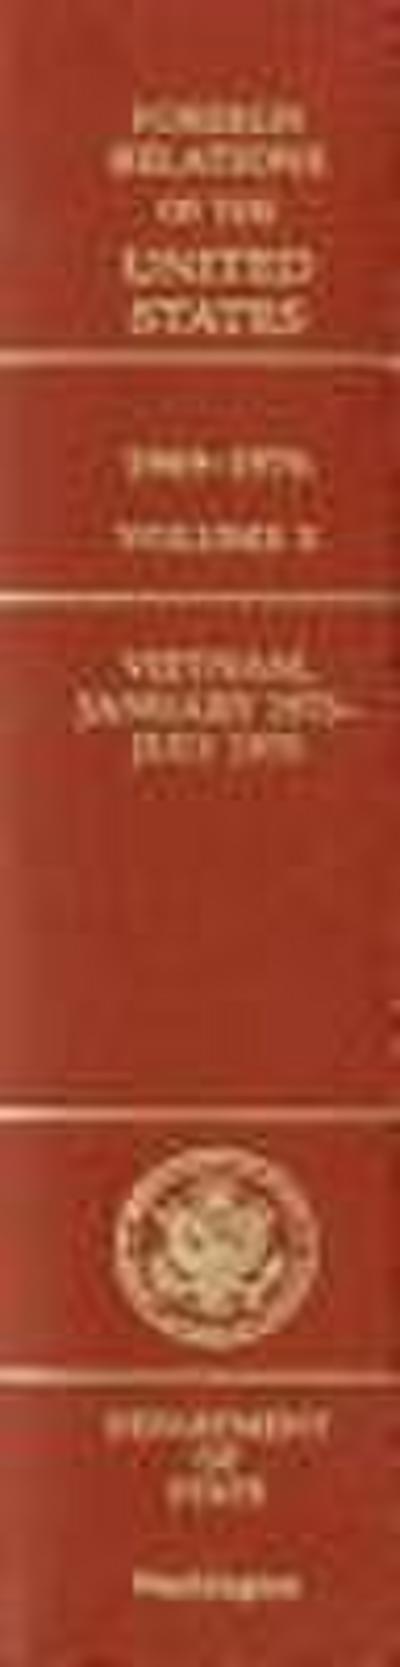 Foreign Relations of the United States: 1969-1976, Vietnam